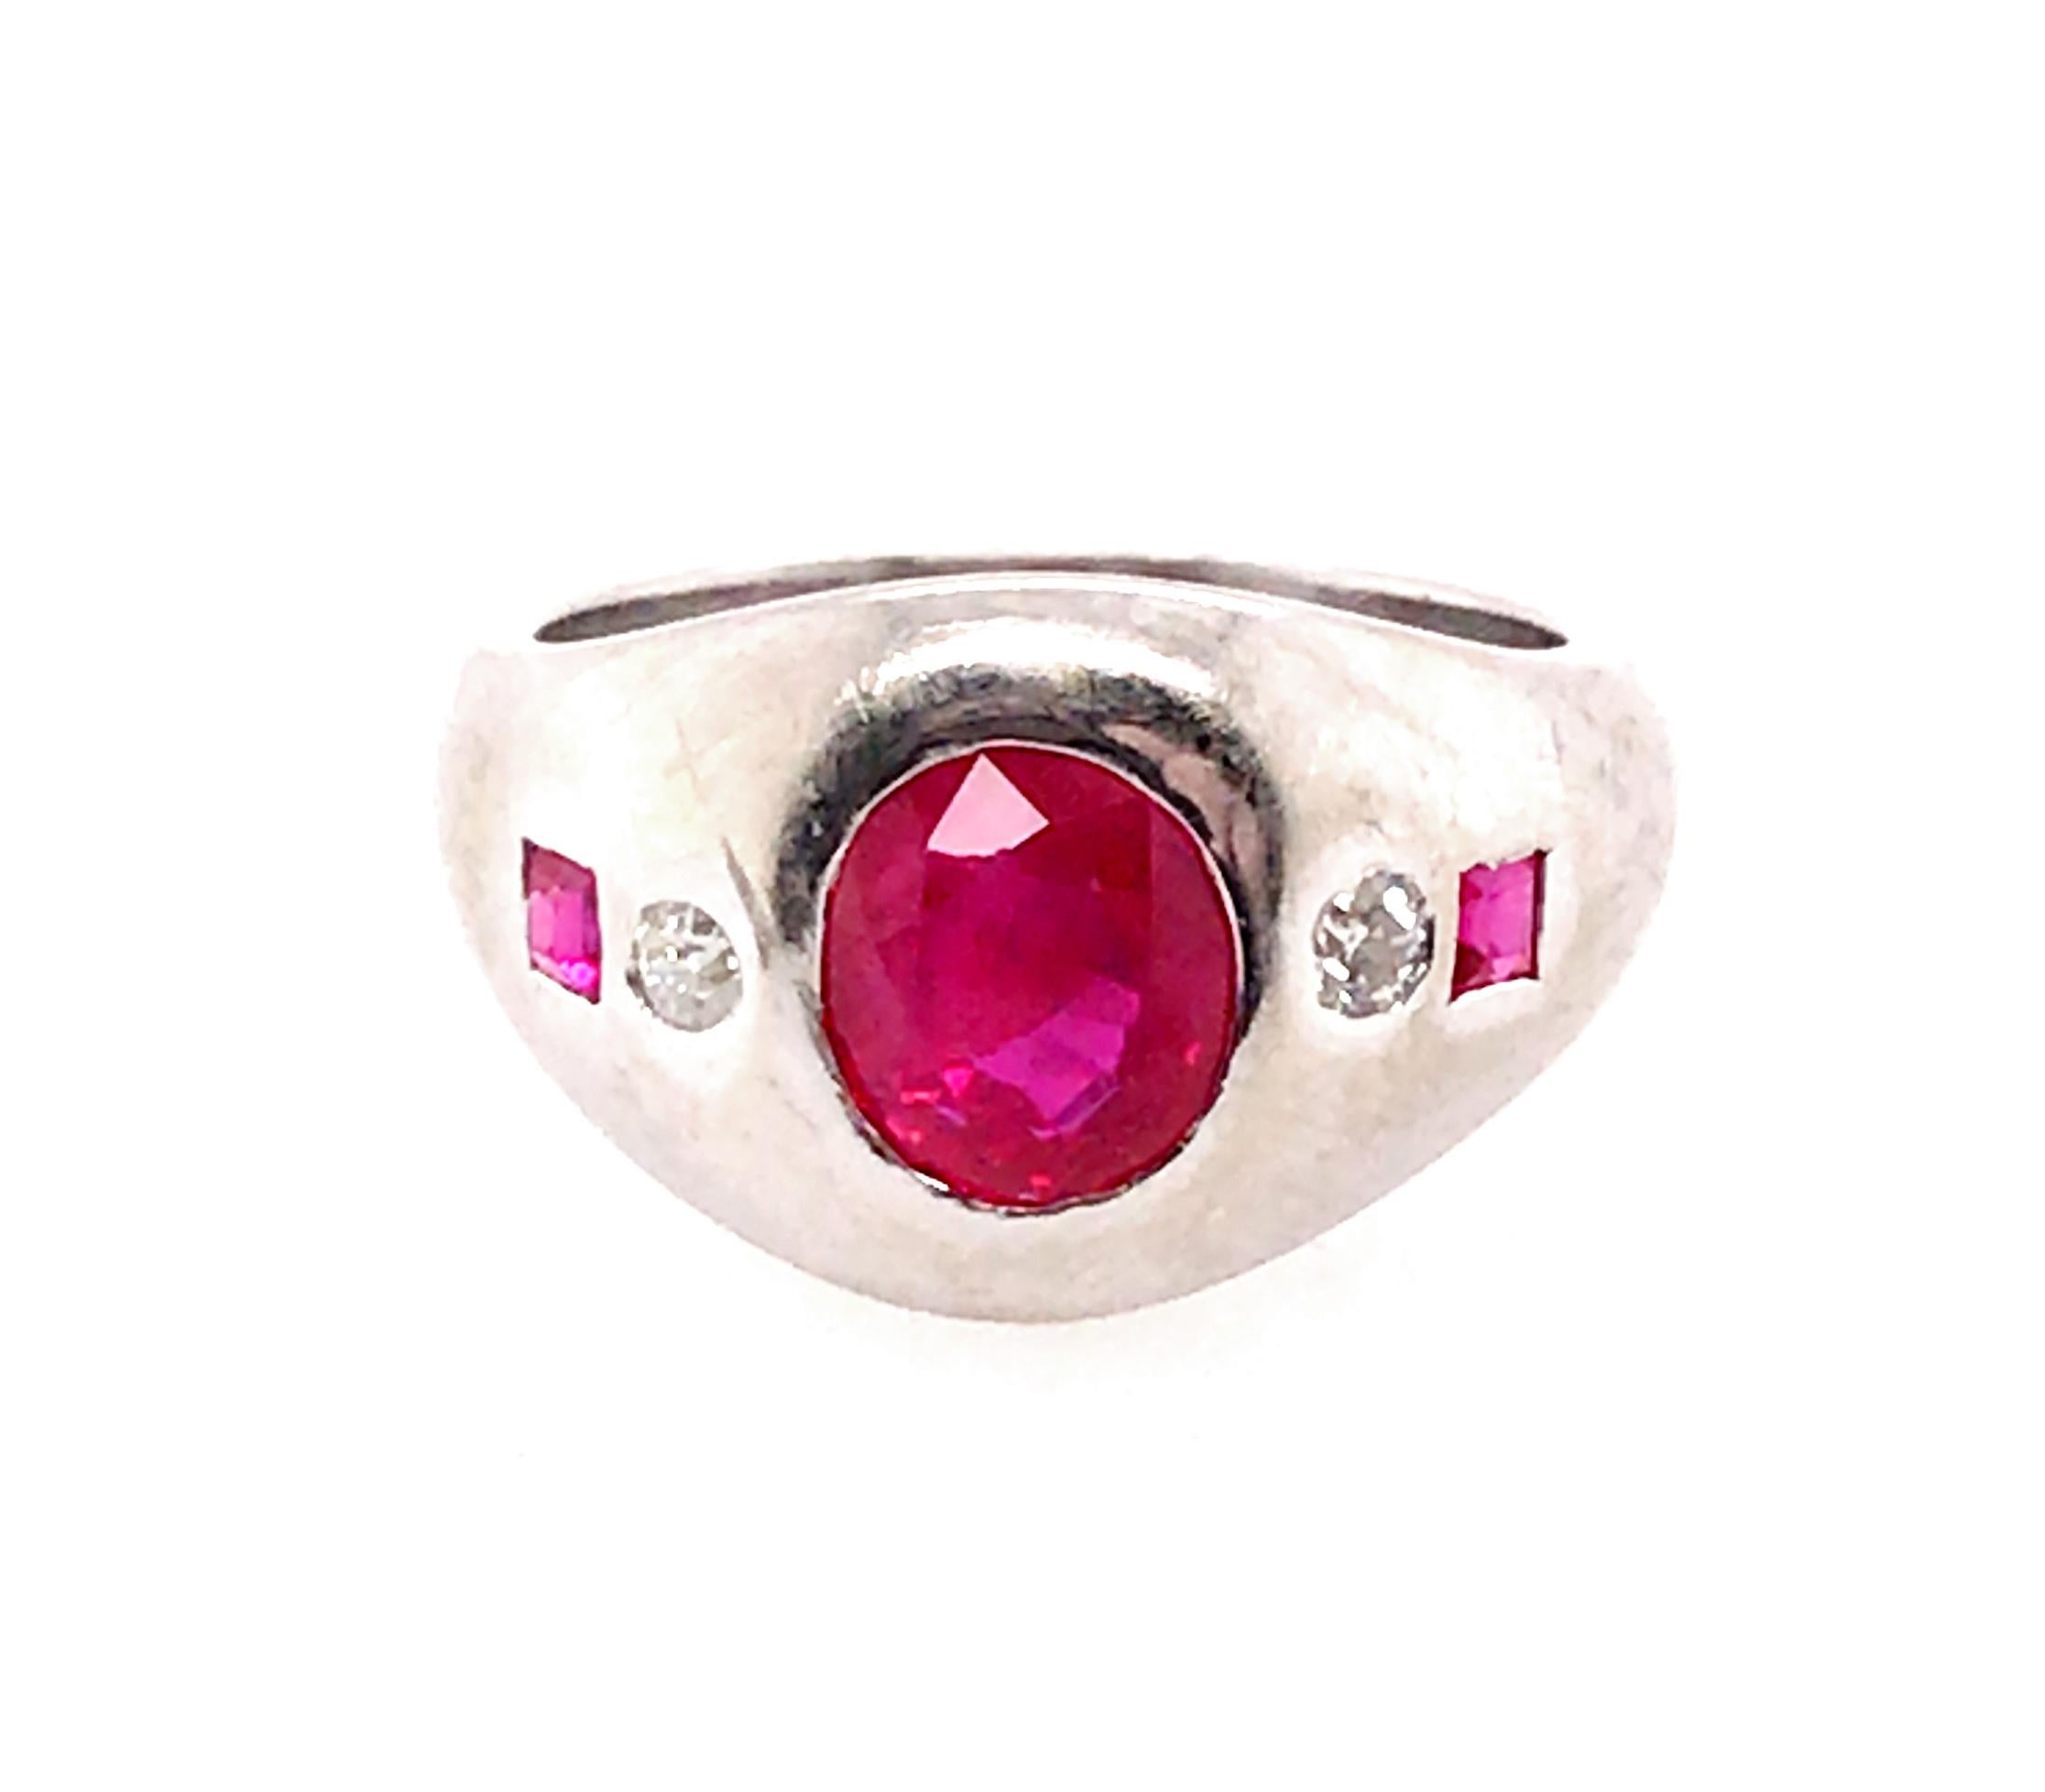 Discover the Timeless Elegance of our NO HEAT Ruby Ring, Adorned with a Stunning 2ct Burma Pigeon Blood Ruby and VS Diamonds. Time-Travel to the 1930's Art Deco Era. GIA Certified. Shop now!


2 Carat Genuine Oval Ruby, Straight from the Burma